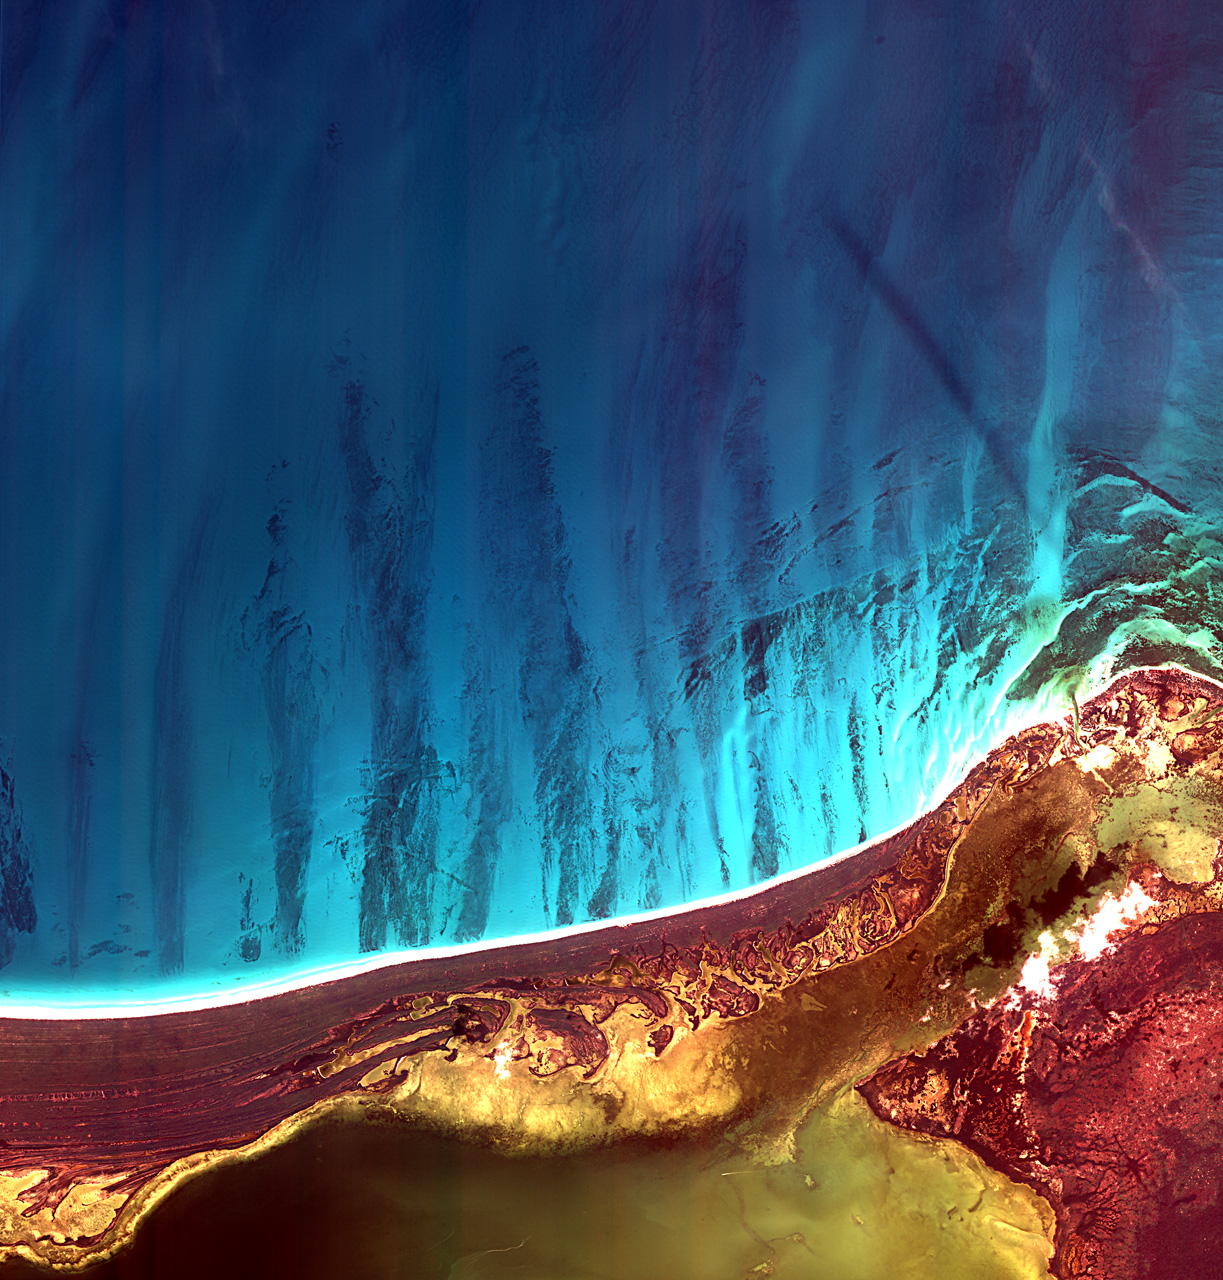 Holbox Island and the Yalahau Lagoon on the northeast corner of Mexico’s Yucatan Peninsula are featured in this image, acquired by the Korea Multi-purpose Satellite (Kompsat-2) of the Korea Aerospace Research Institute (KARI).